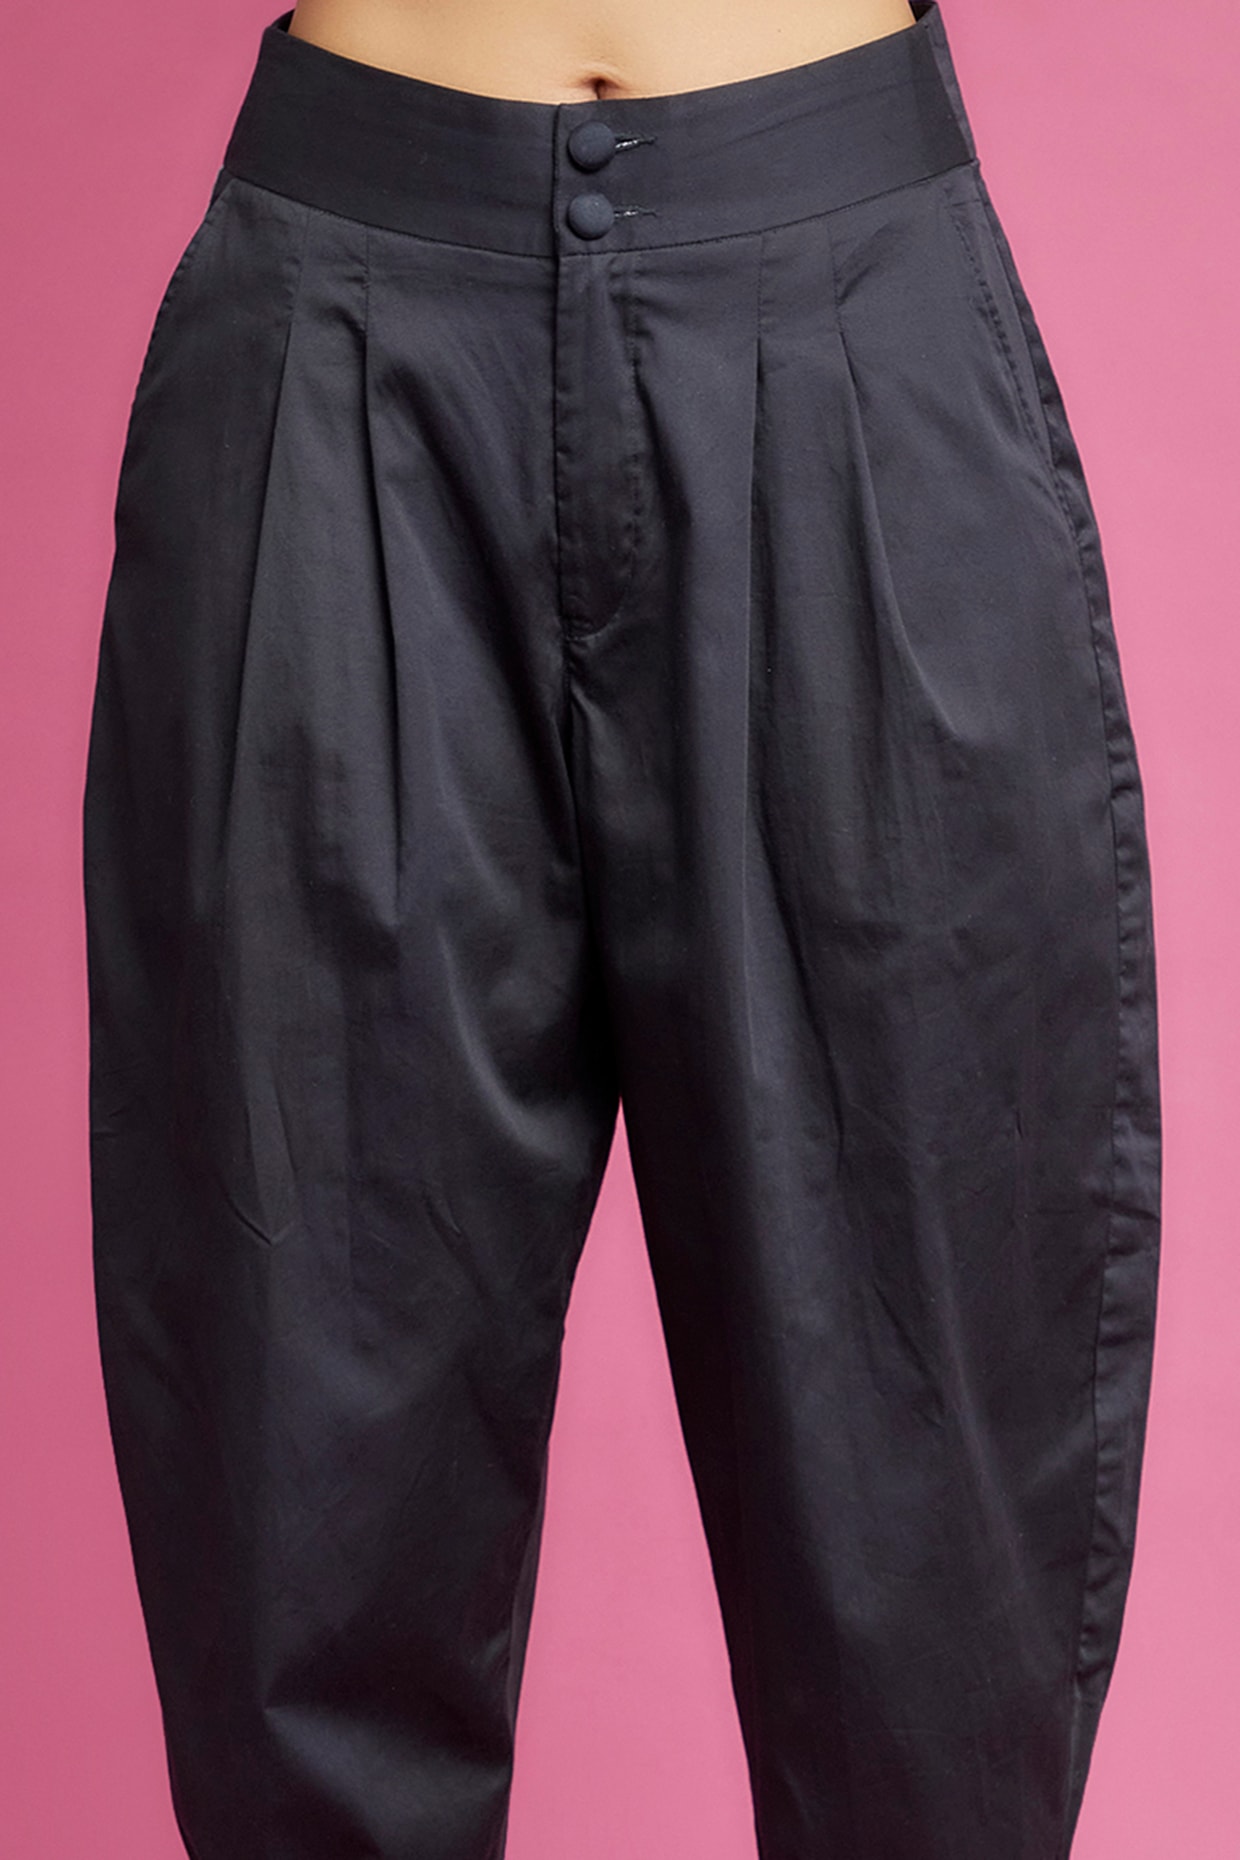 famiss fashion Solid Rayon Women Harem Pants - Buy famiss fashion Solid  Rayon Women Harem Pants Online at Best Prices in India | Flipkart.com